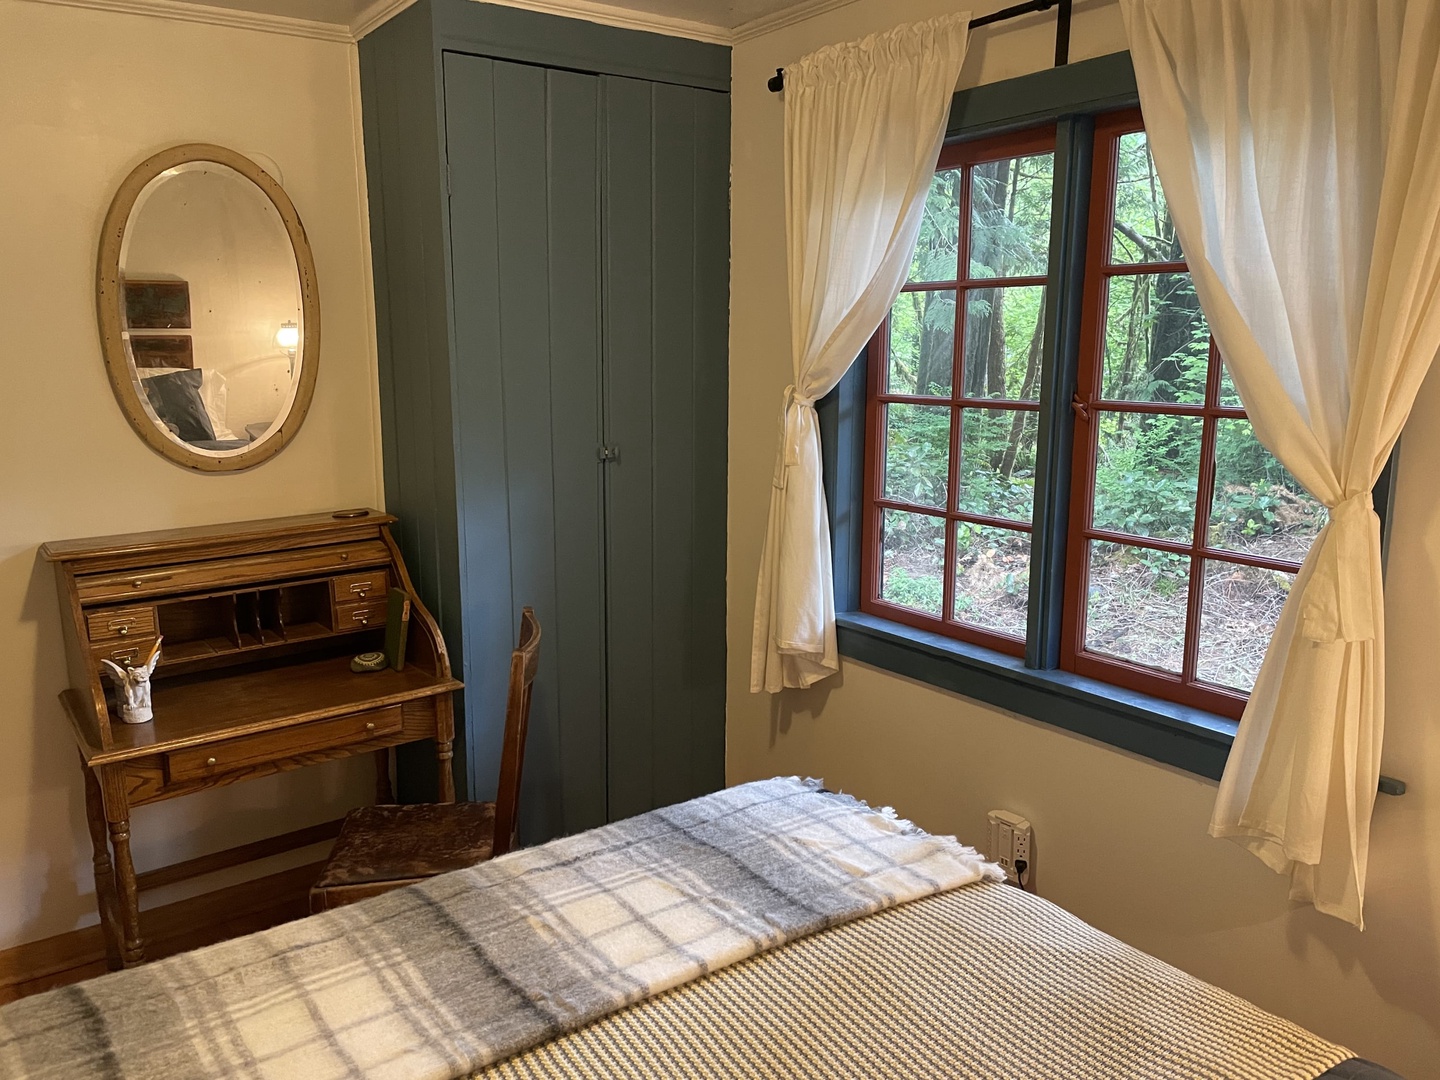 Brightwood Vacation Rentals, Springbrook Cabin - Writing desk in guest bedroom